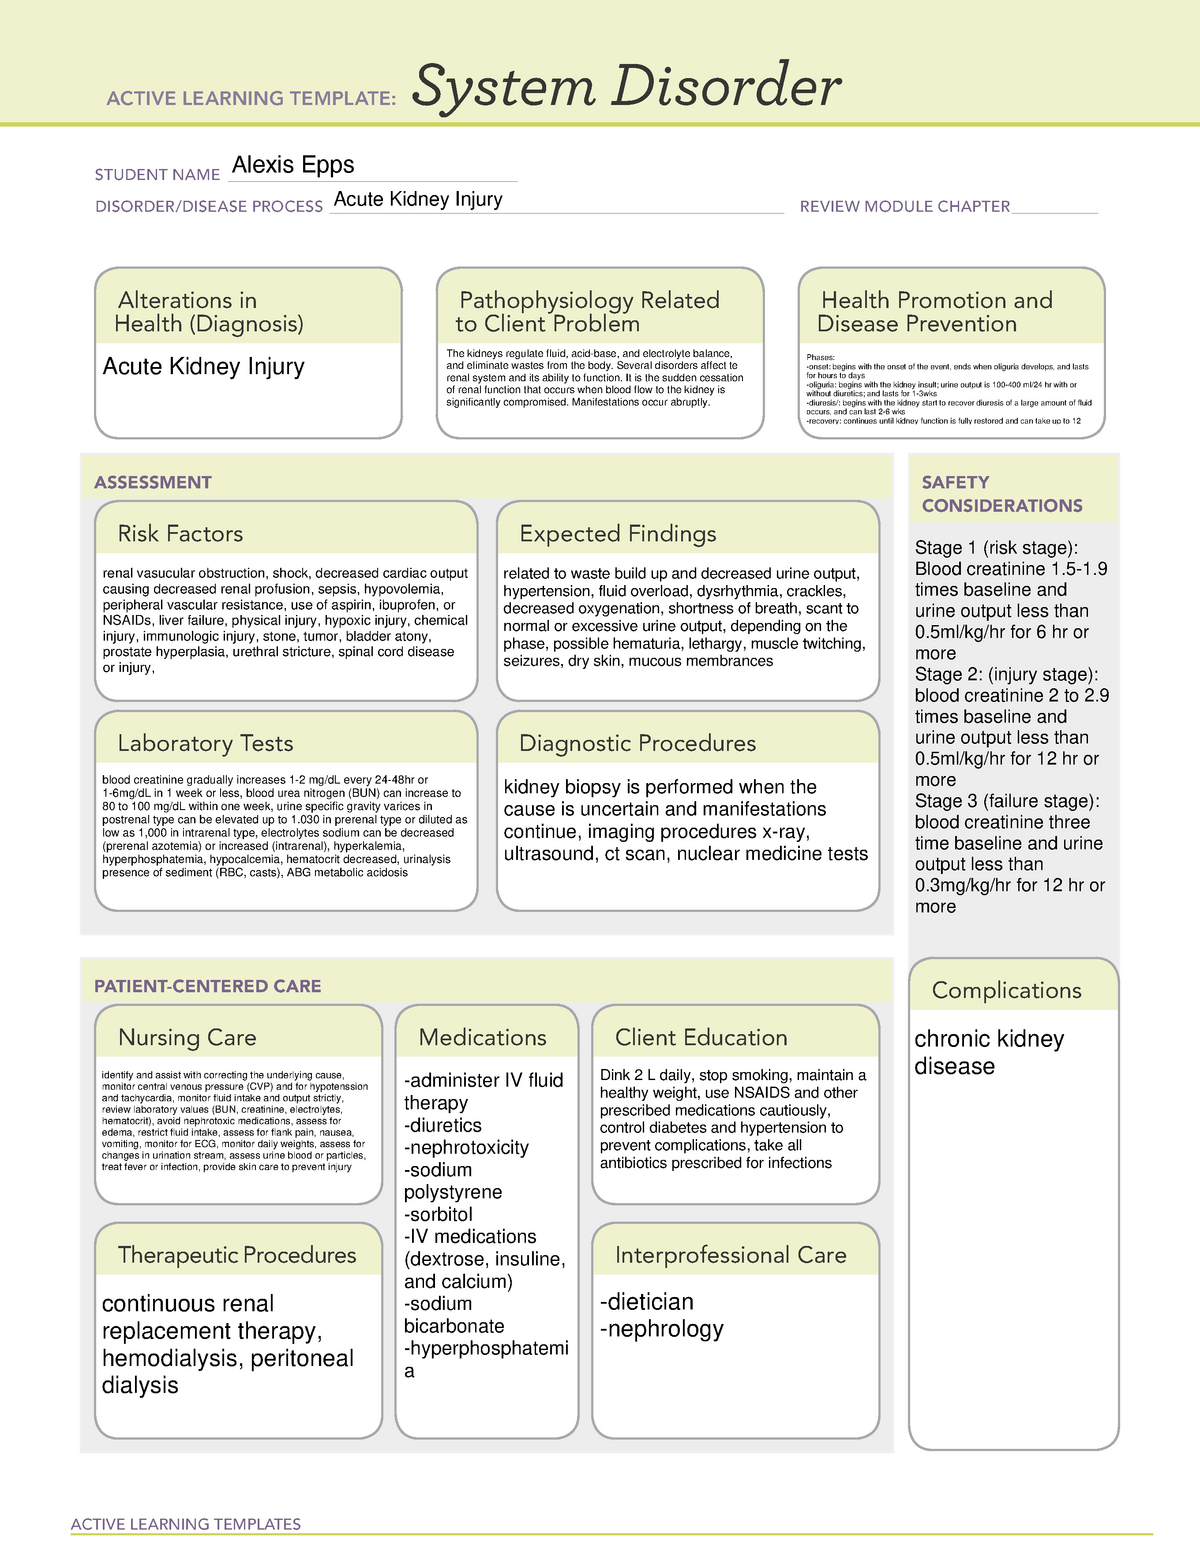 Acute Kidney Injury System Disorder Template